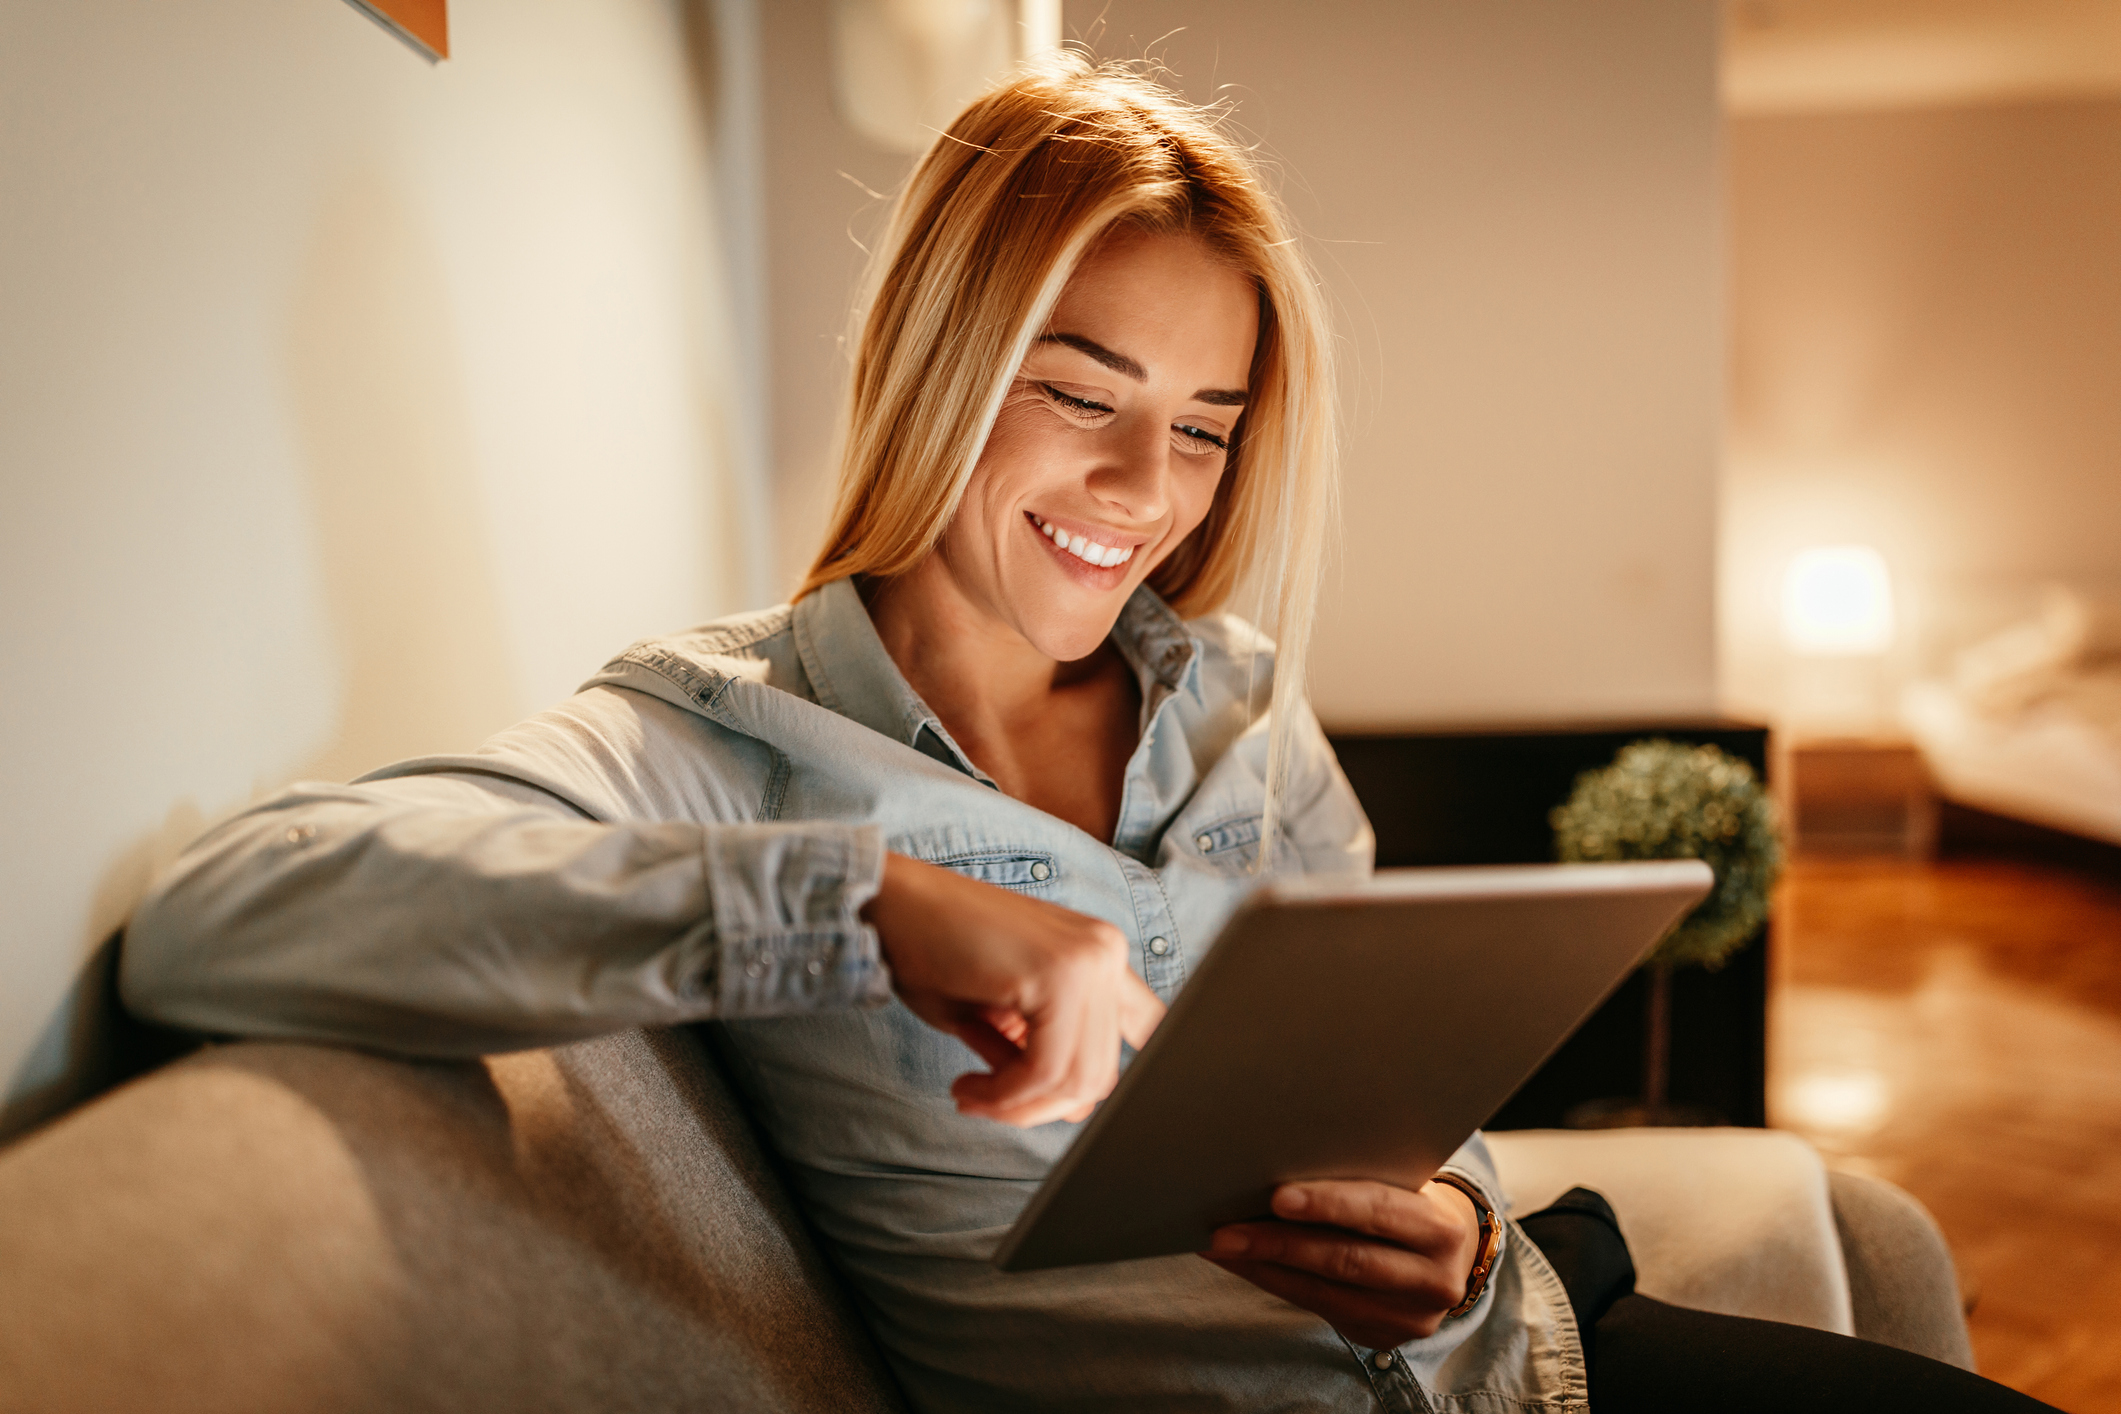 Attractive young woman holding a tablet at home reading up on permissions to run a business from home